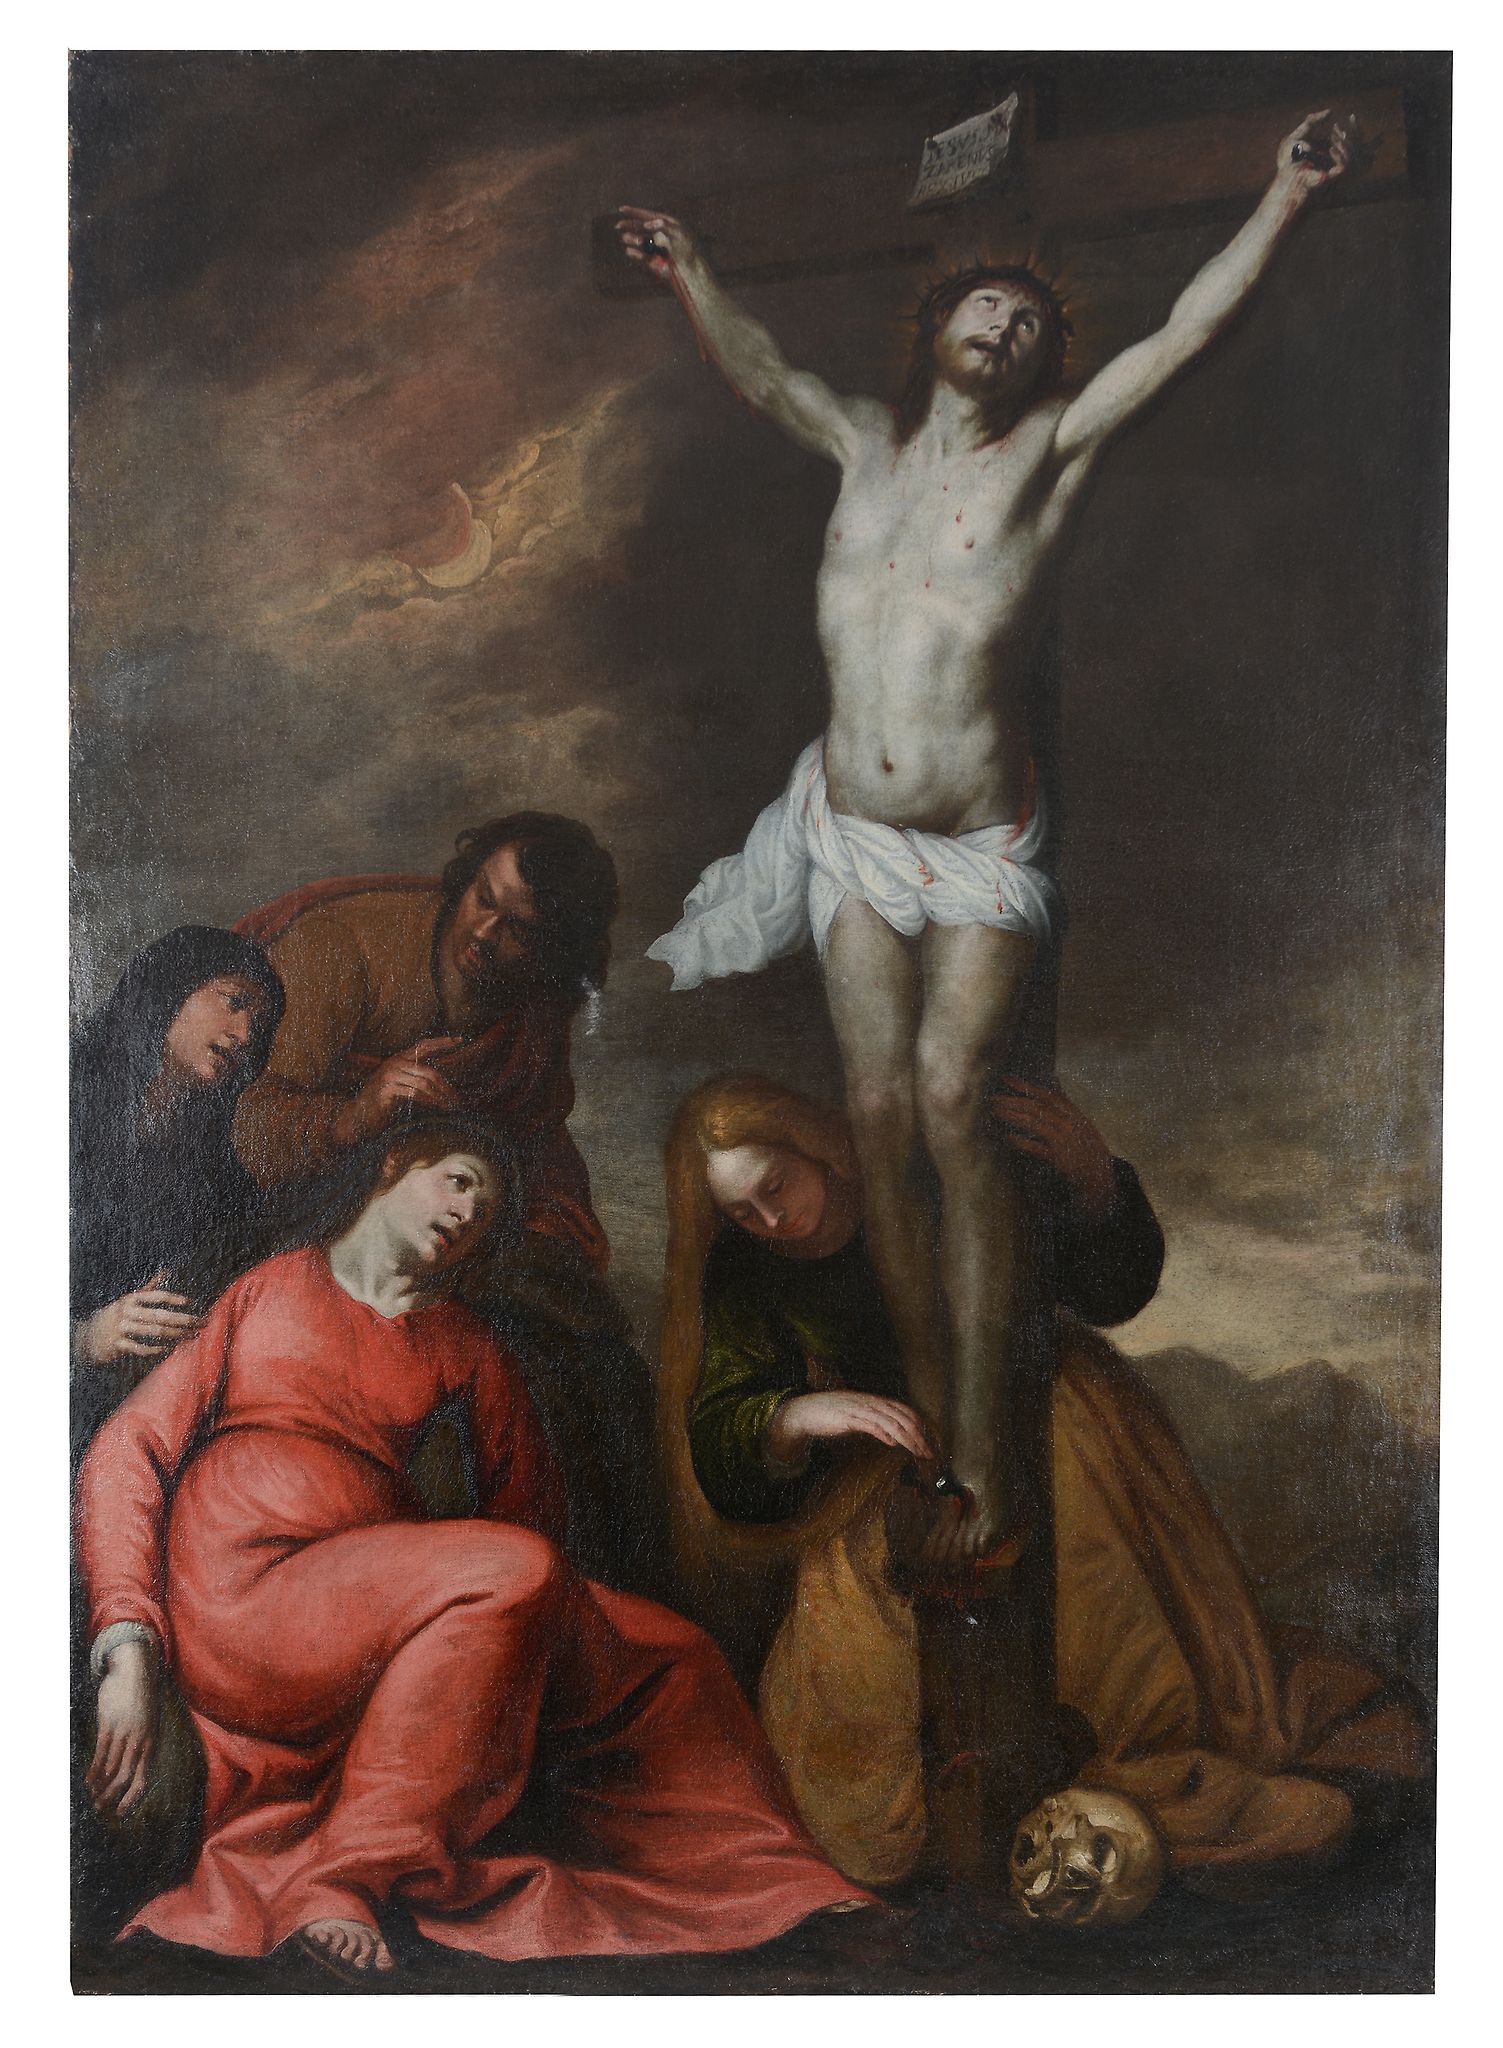 Circle of Luciano Borzone (1590-1645) - Crucifixion of Christ Oil on canvas 171 x 120 cm. (67 1/4